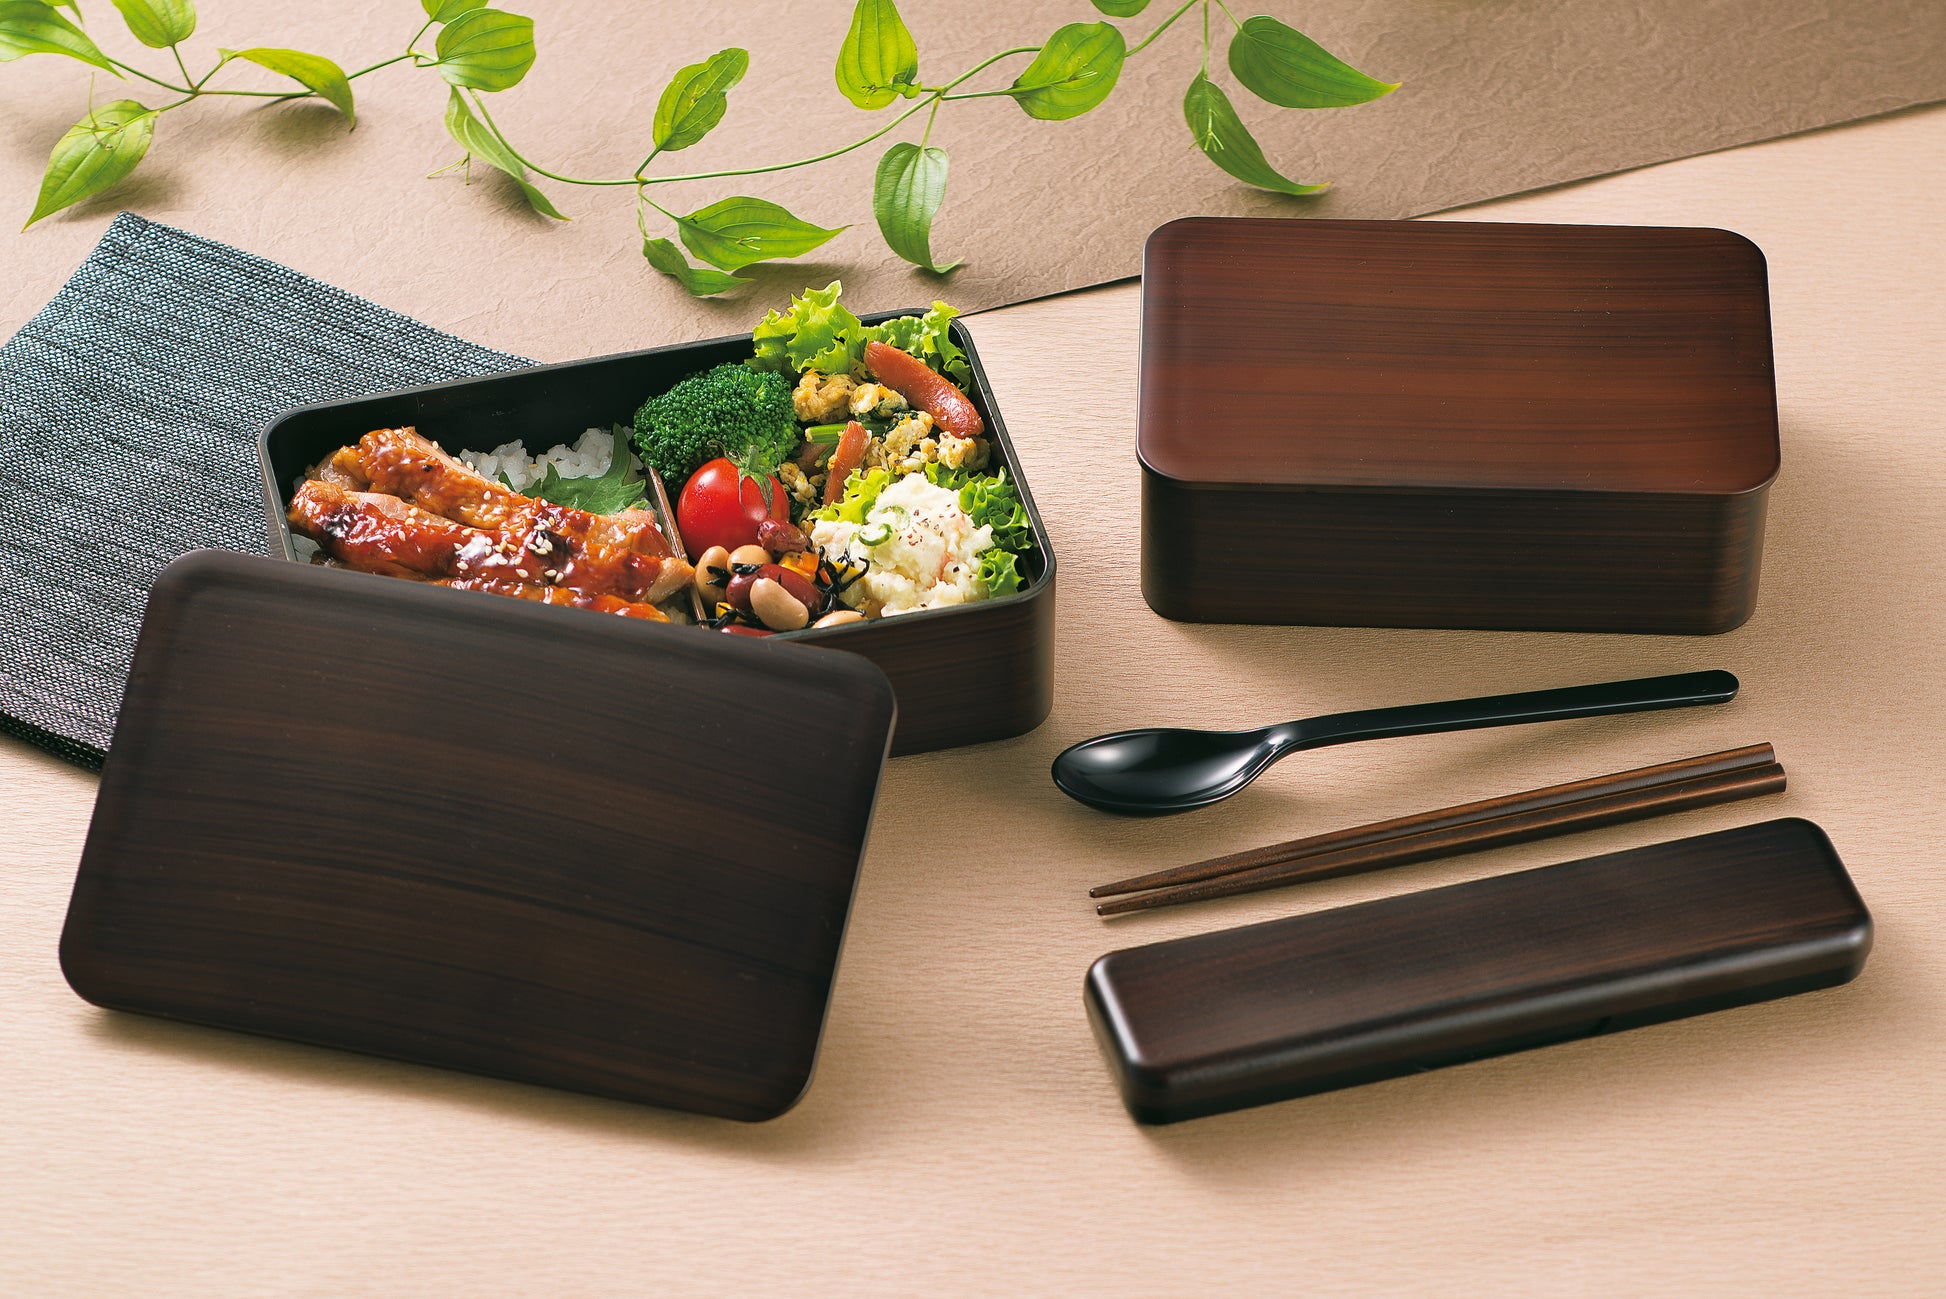 Bento Tek 41 oz Wood Grain and White Buddha Box All-in-One Lunch Box - with